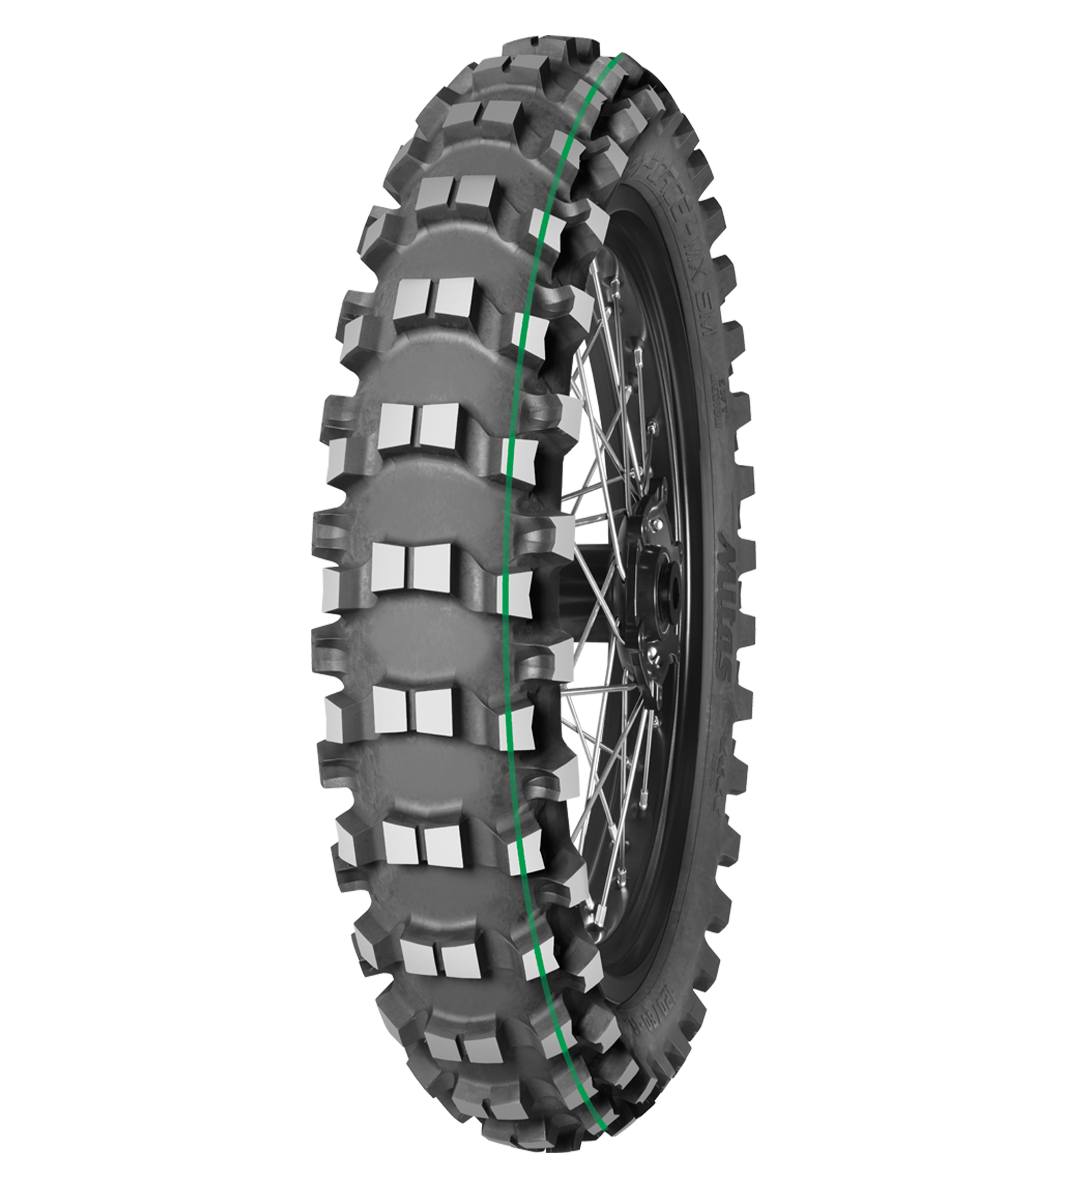 Mitas TERRA FORCE-MX SM 110/100-18 Enduro Competition Off-Road SUPER LIGHT 64M Green Tube Rear Tire, 226323, 110/100-18, Enduro Competition, Off-Road, Rear, Terra Force, Terra Force-MX SM, Trail, Tires - Imported and distributed in North & South America by Lindeco Genuine Powersports - Premier Powersports Equipment and Accessories for Motorcycle Enthusiasts, Professional Riders and Dealers.